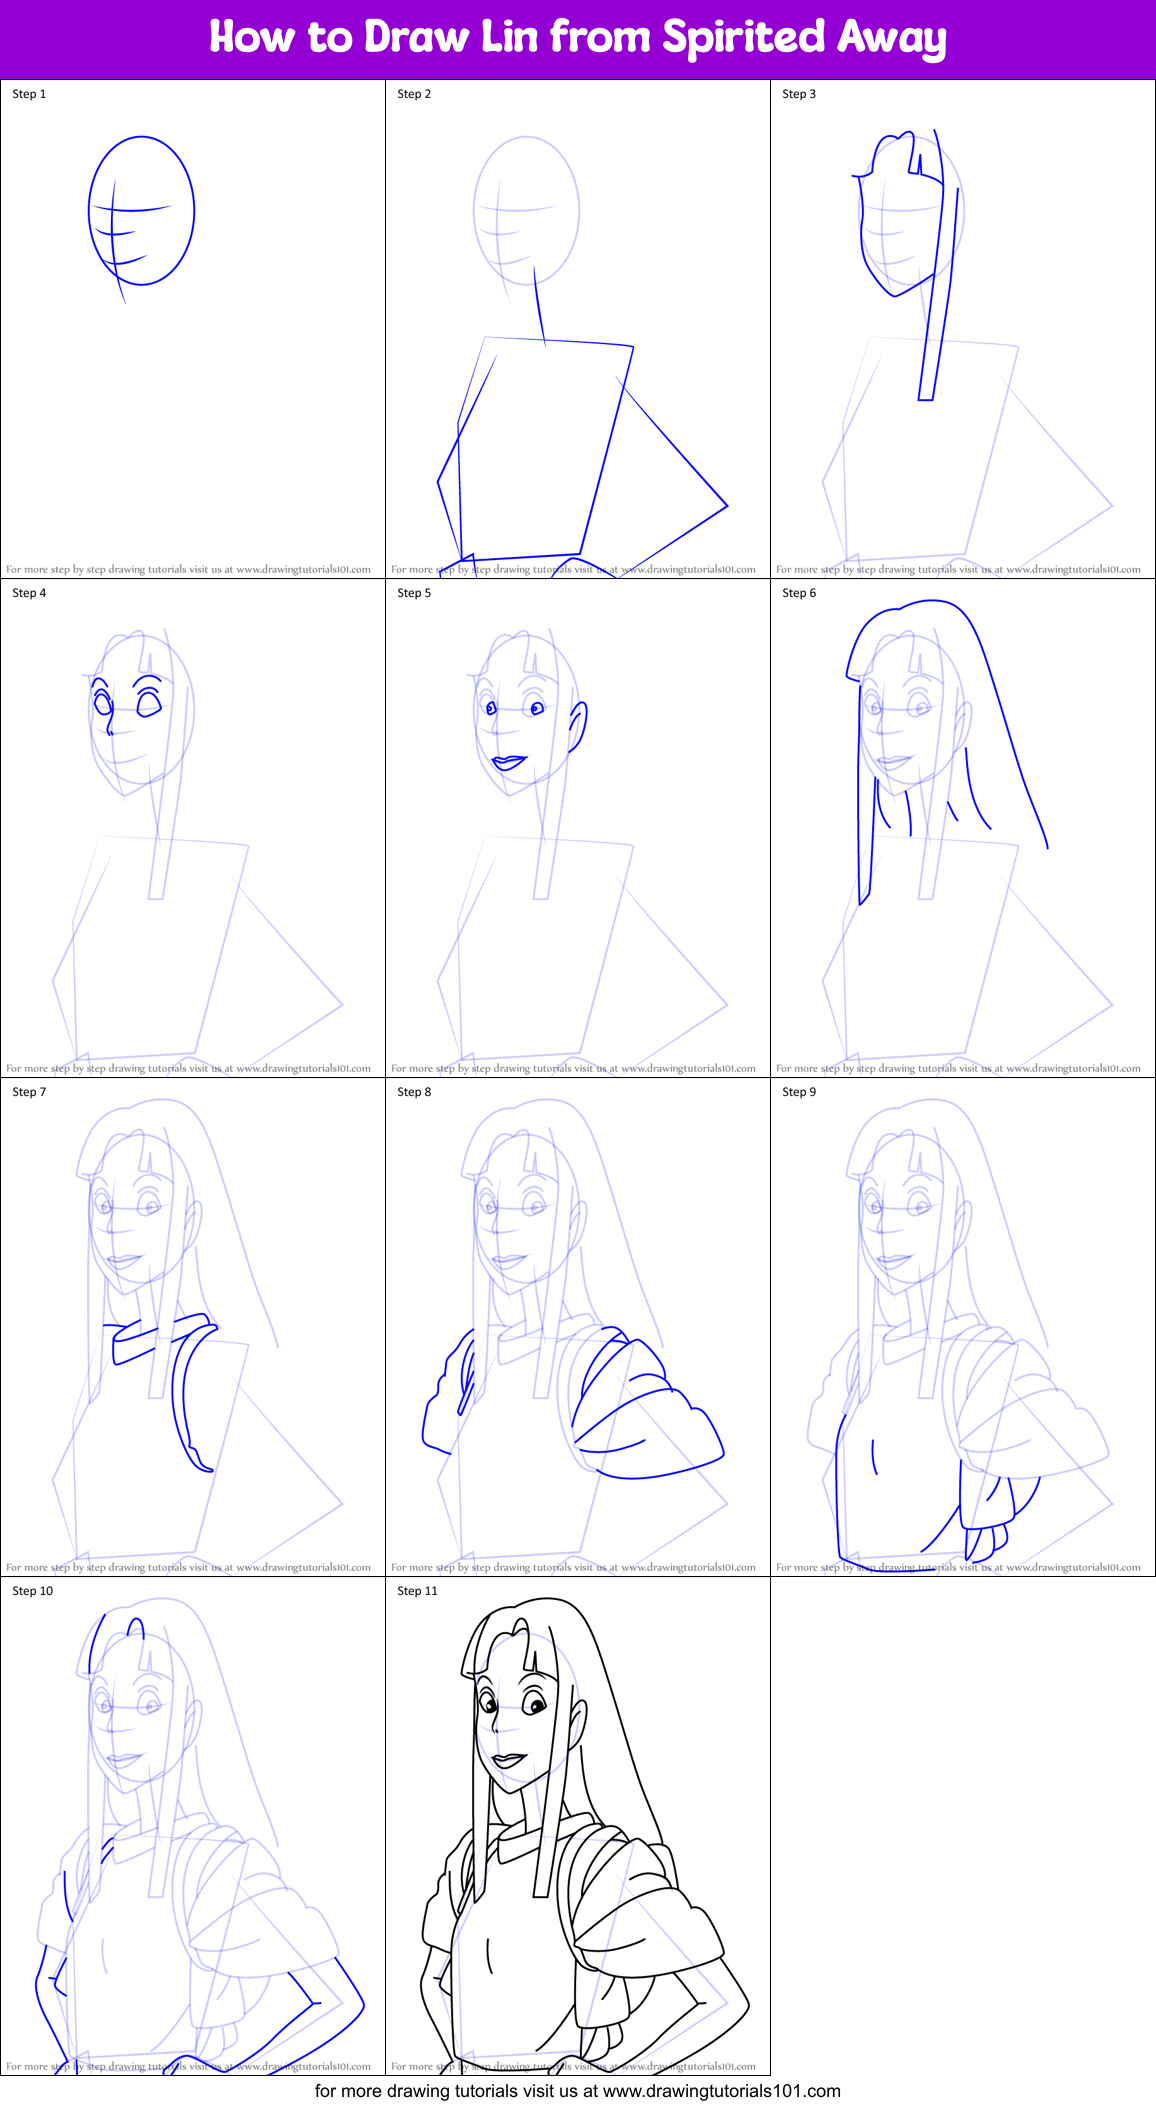 How to Draw Lin from Spirited Away printable step by step drawing sheet